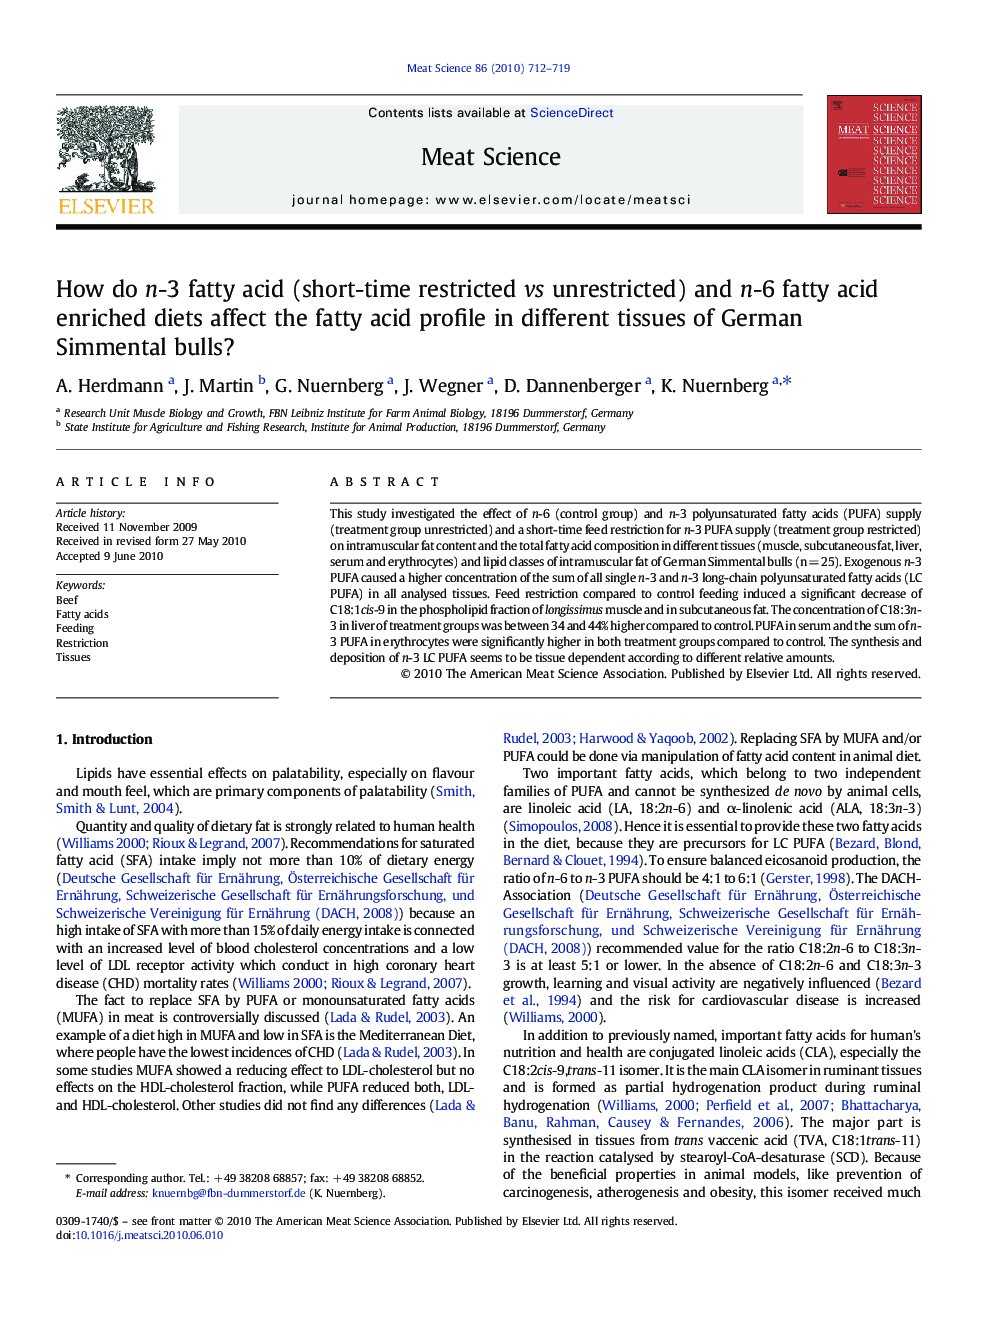 How do n-3 fatty acid (short-time restricted vs unrestricted) and n-6 fatty acid enriched diets affect the fatty acid profile in different tissues of German Simmental bulls?